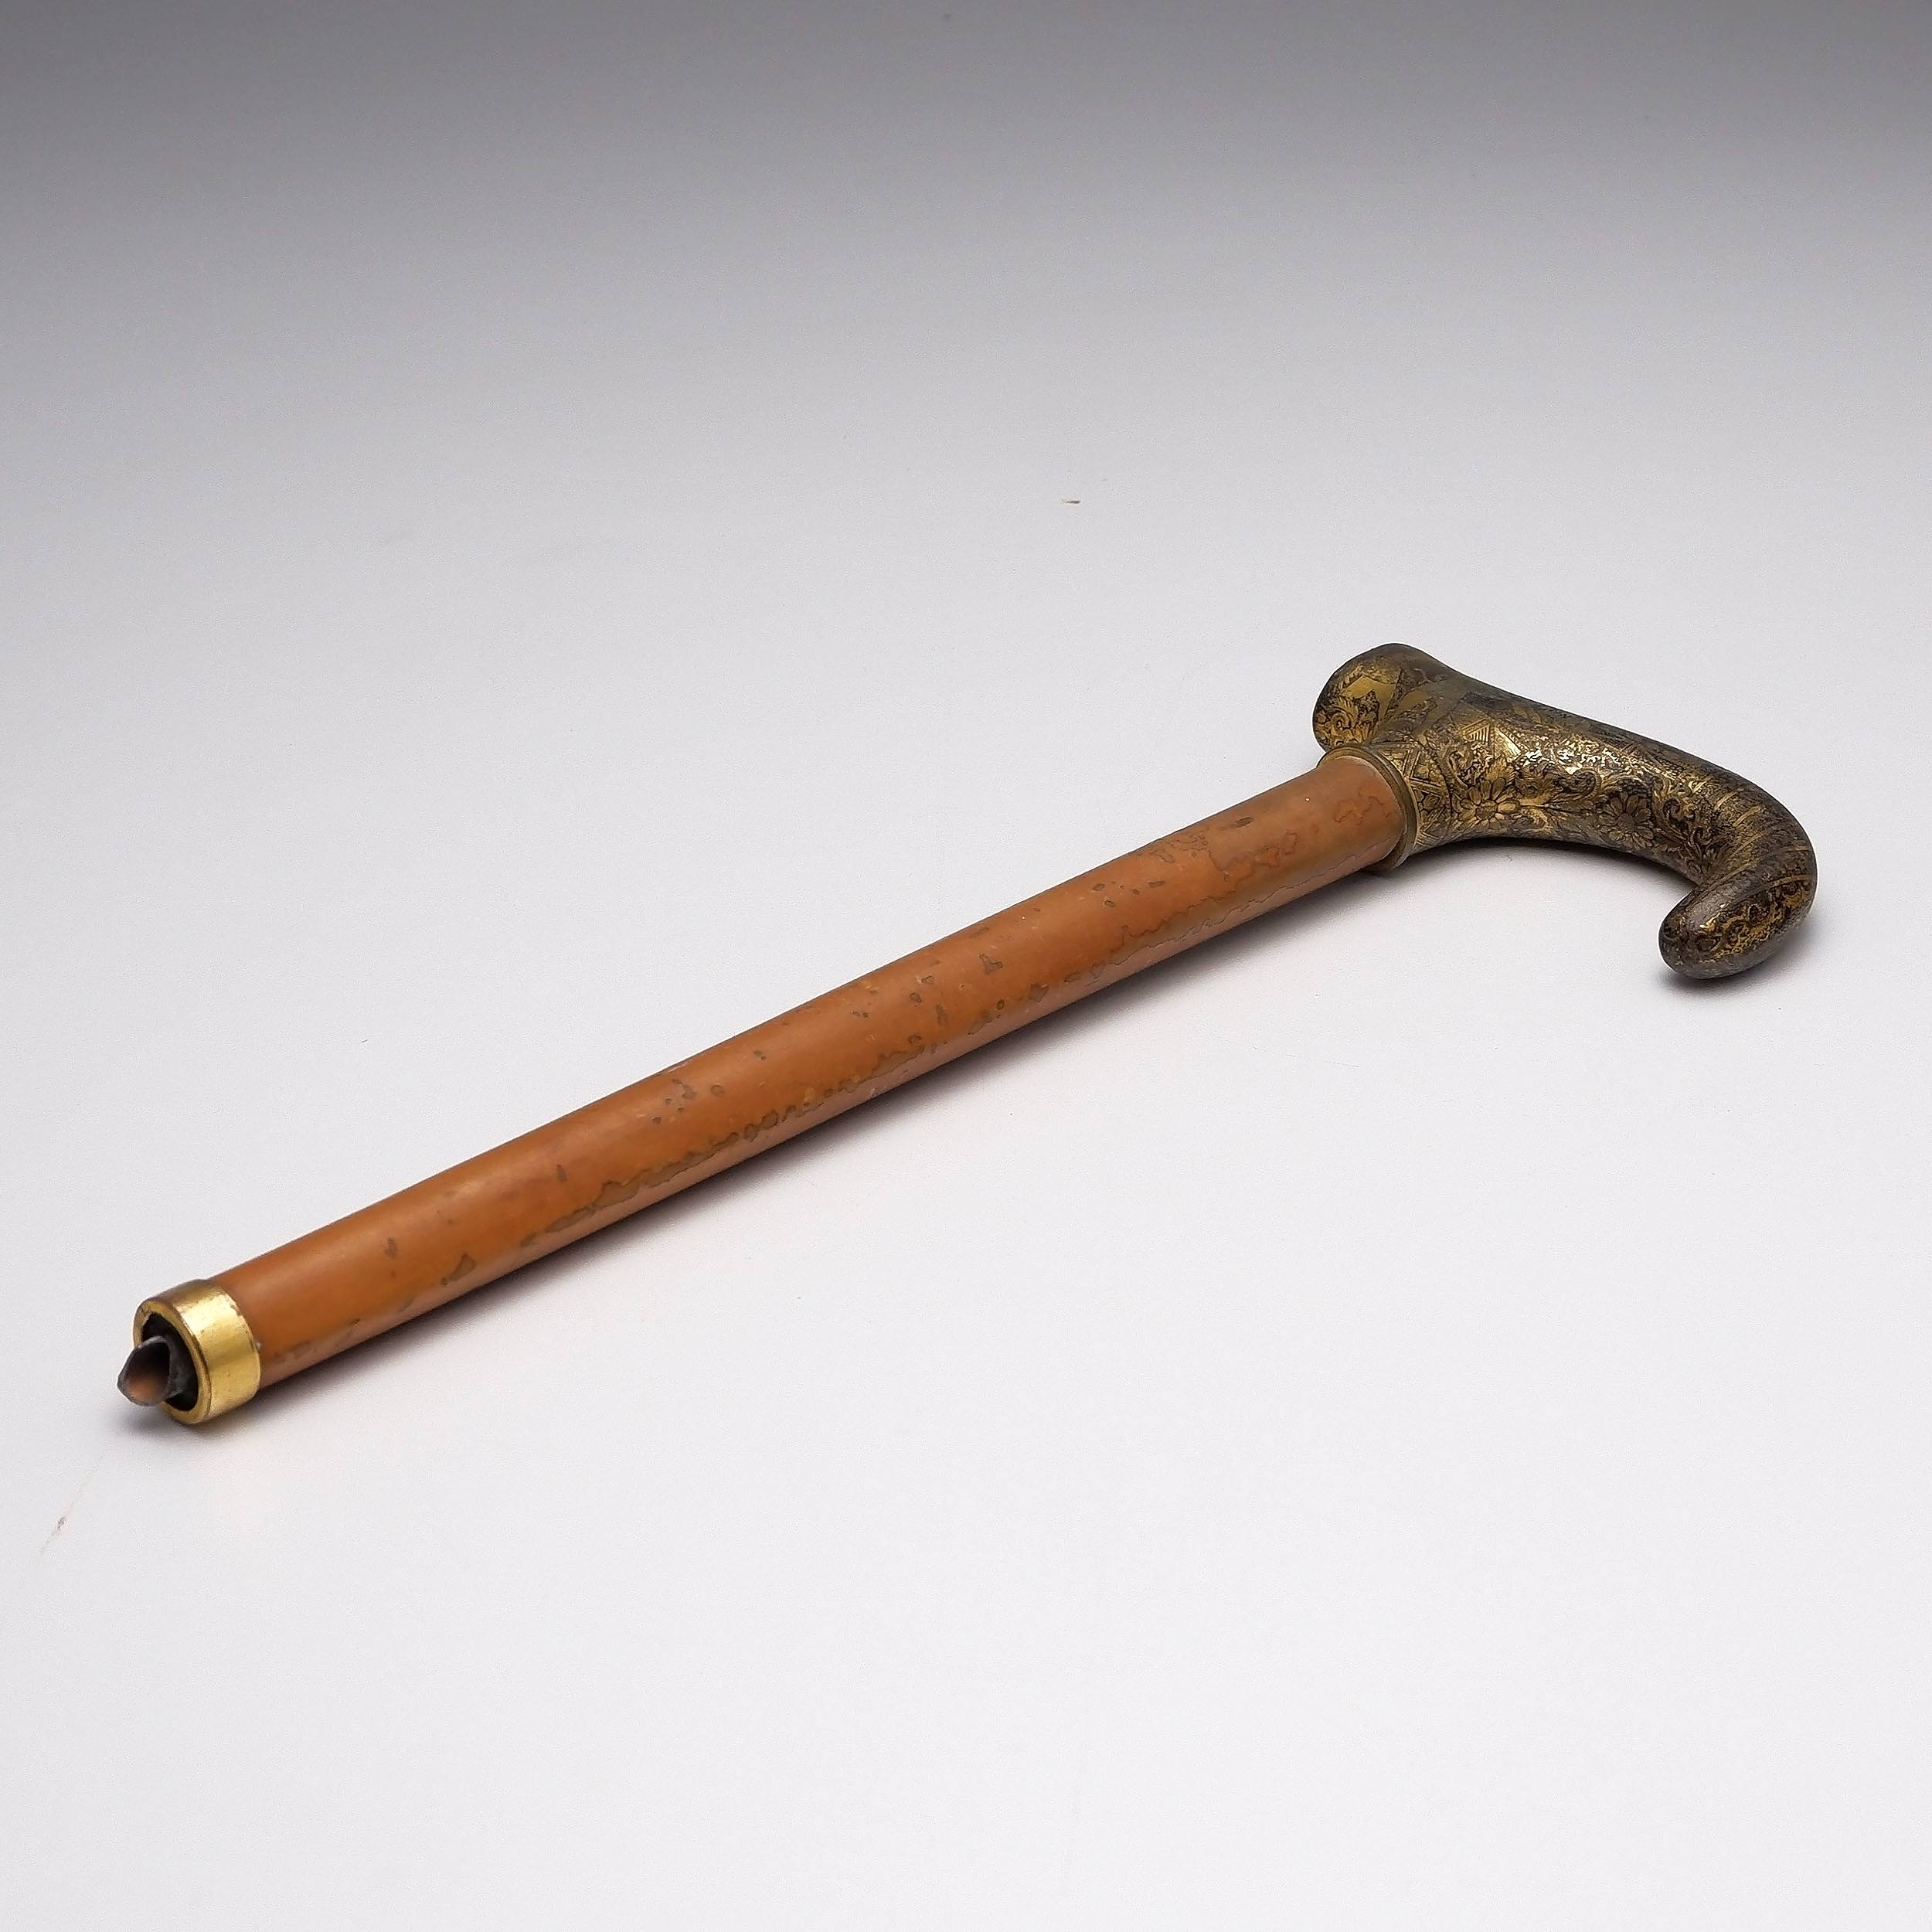 'Antique Indian Engraved and Niello Inlaid Cane Handle'